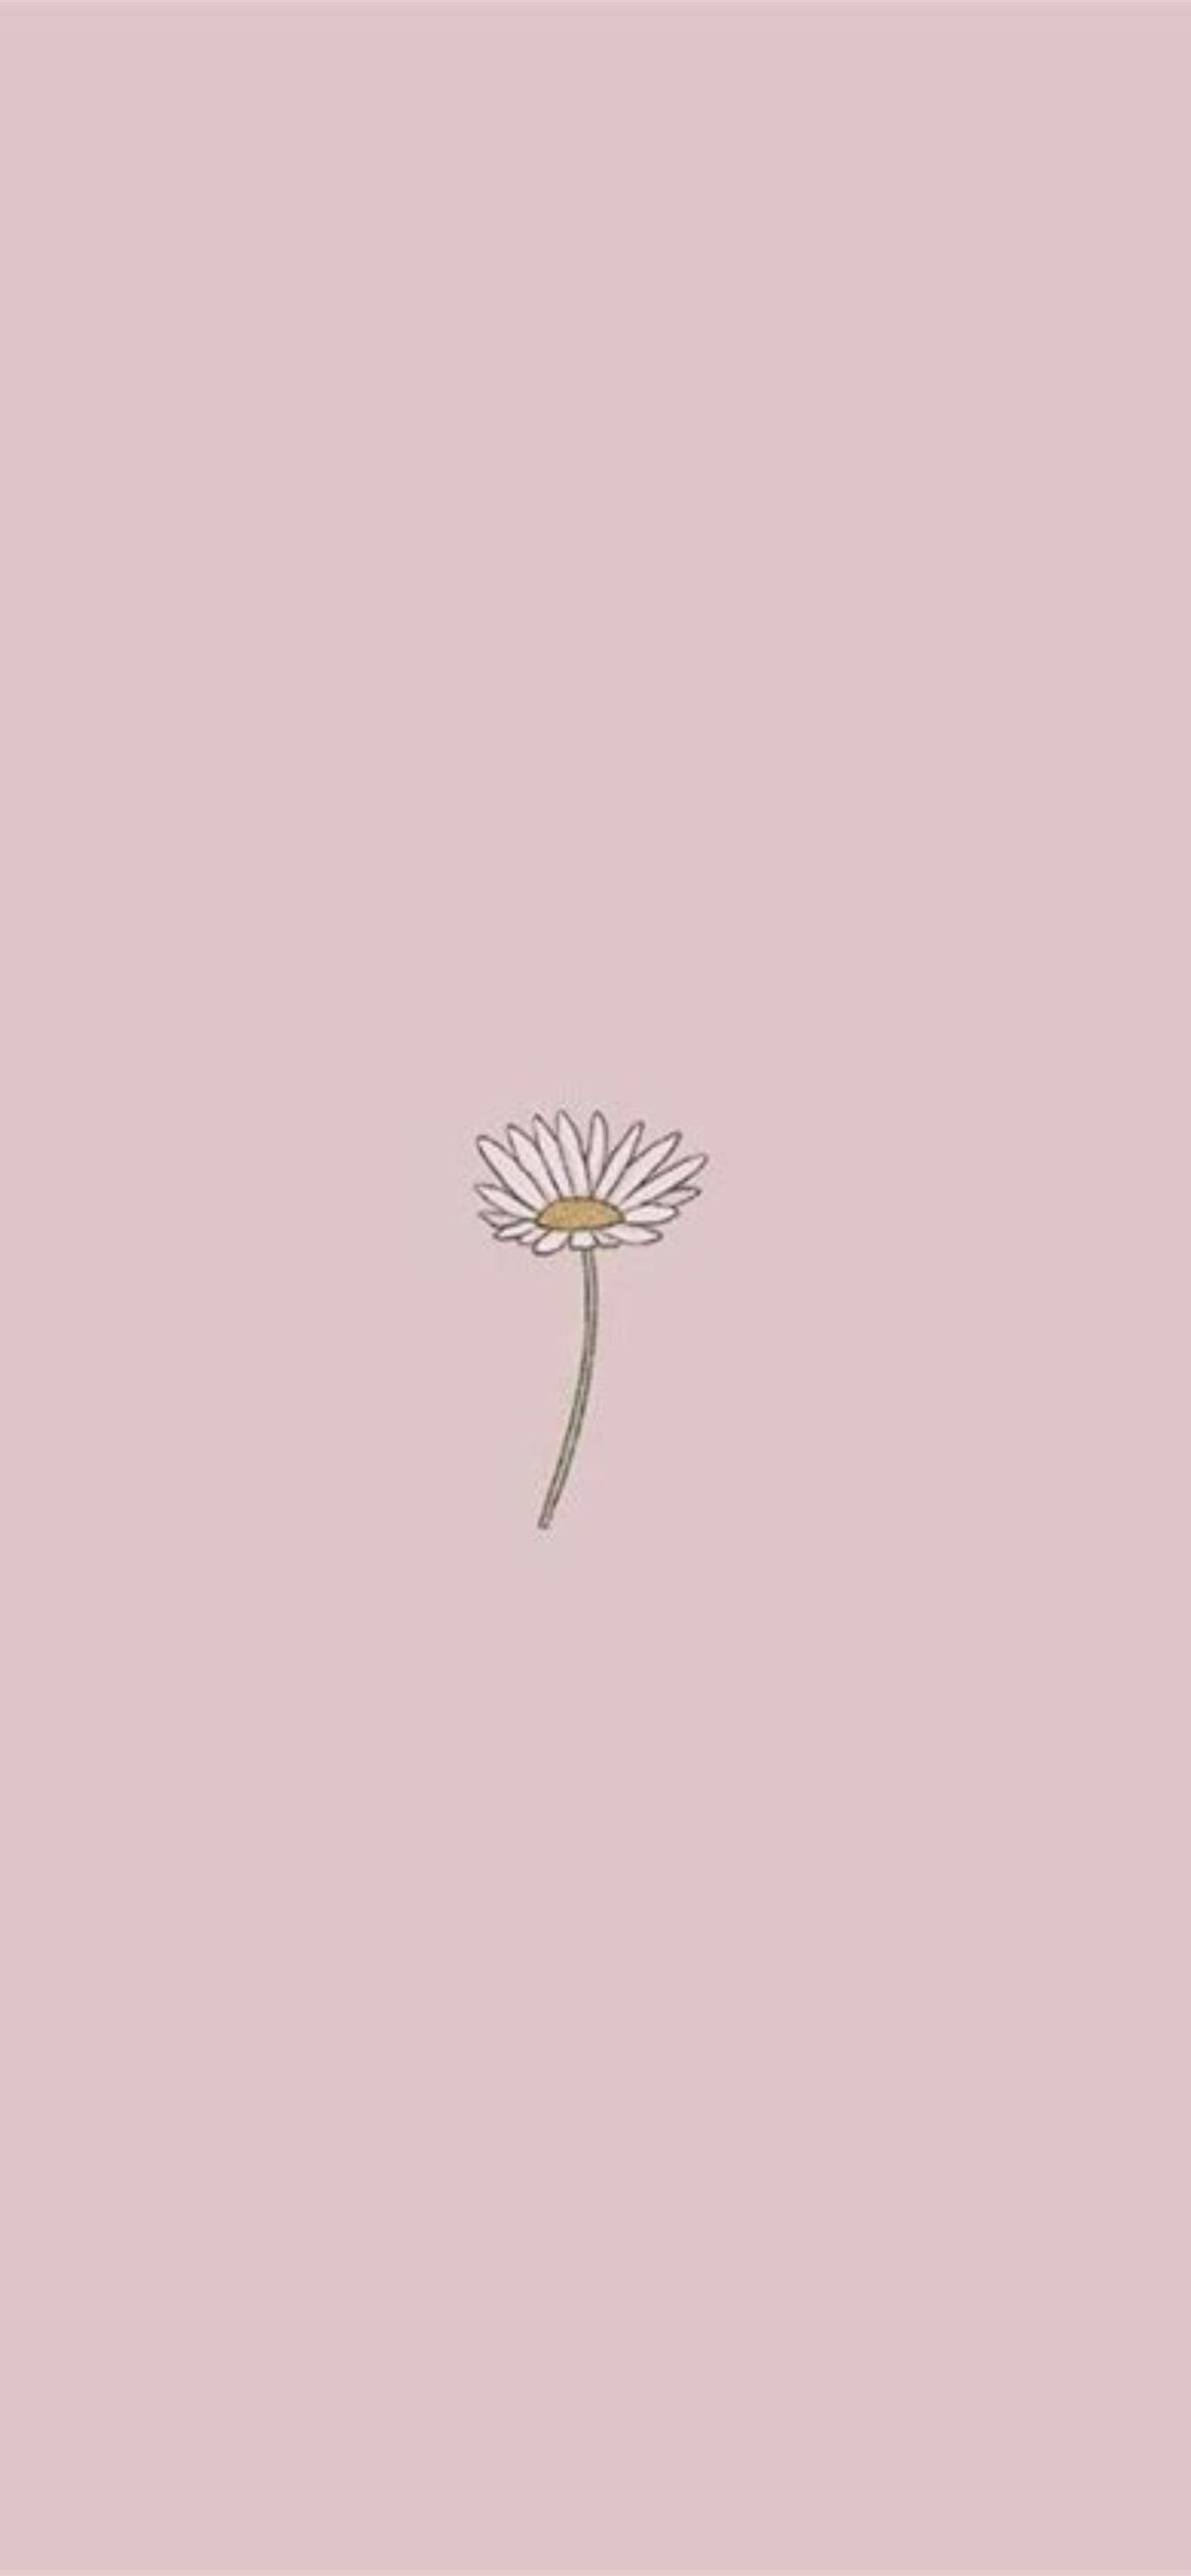 A small daisy on a pink background - Simple, rose gold, HD, TikTok